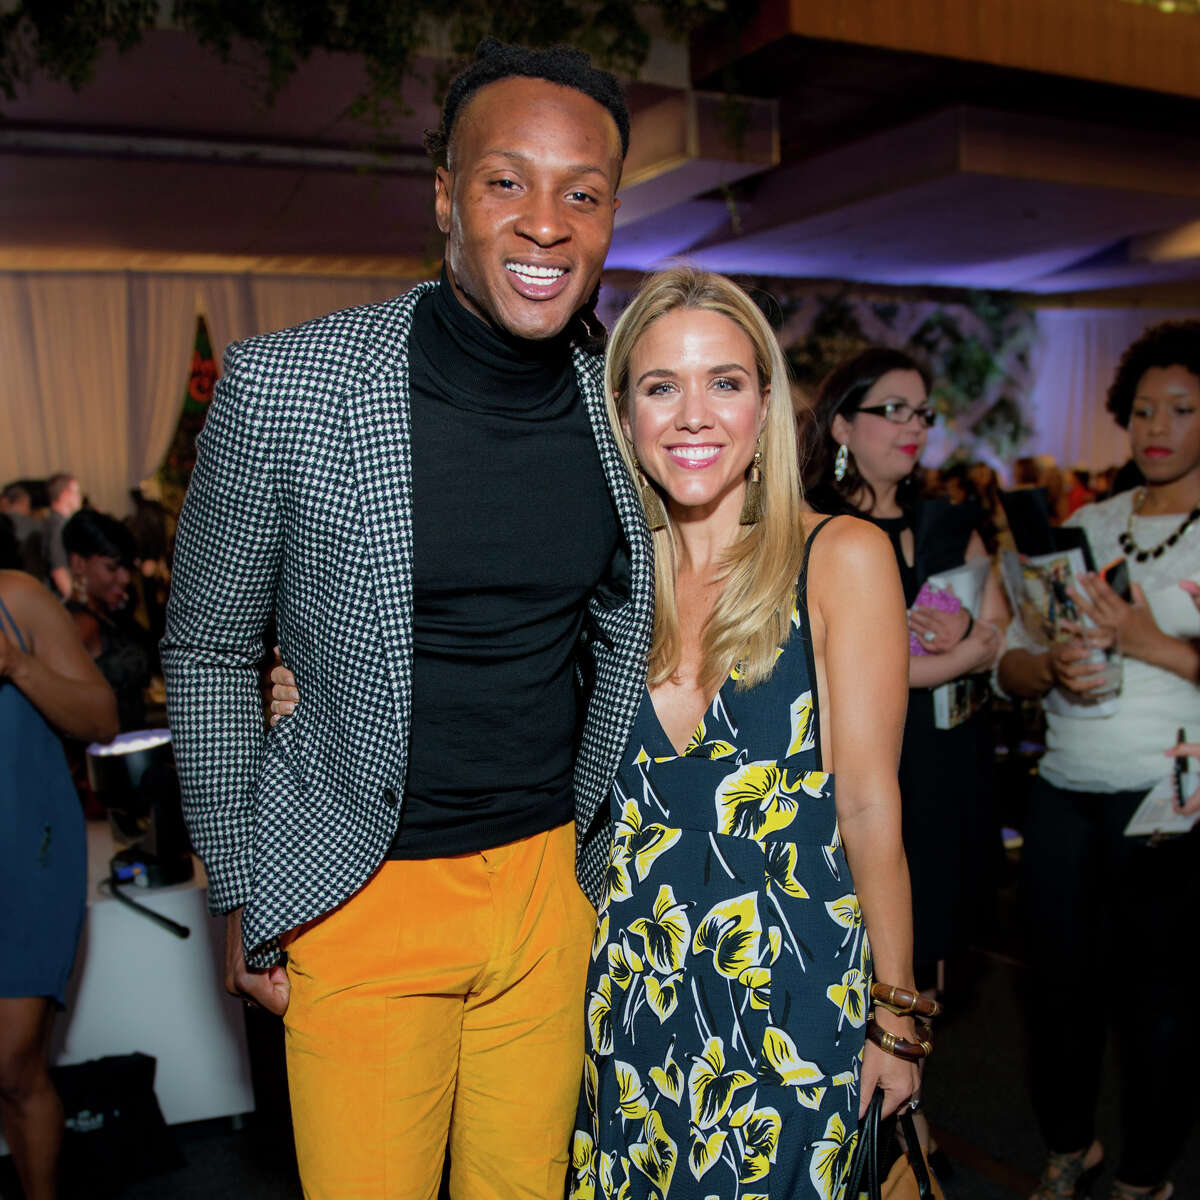 DeAndre Hopkins, wide receiver for the Houston Texans and Vogue market stylist Cara Crowley